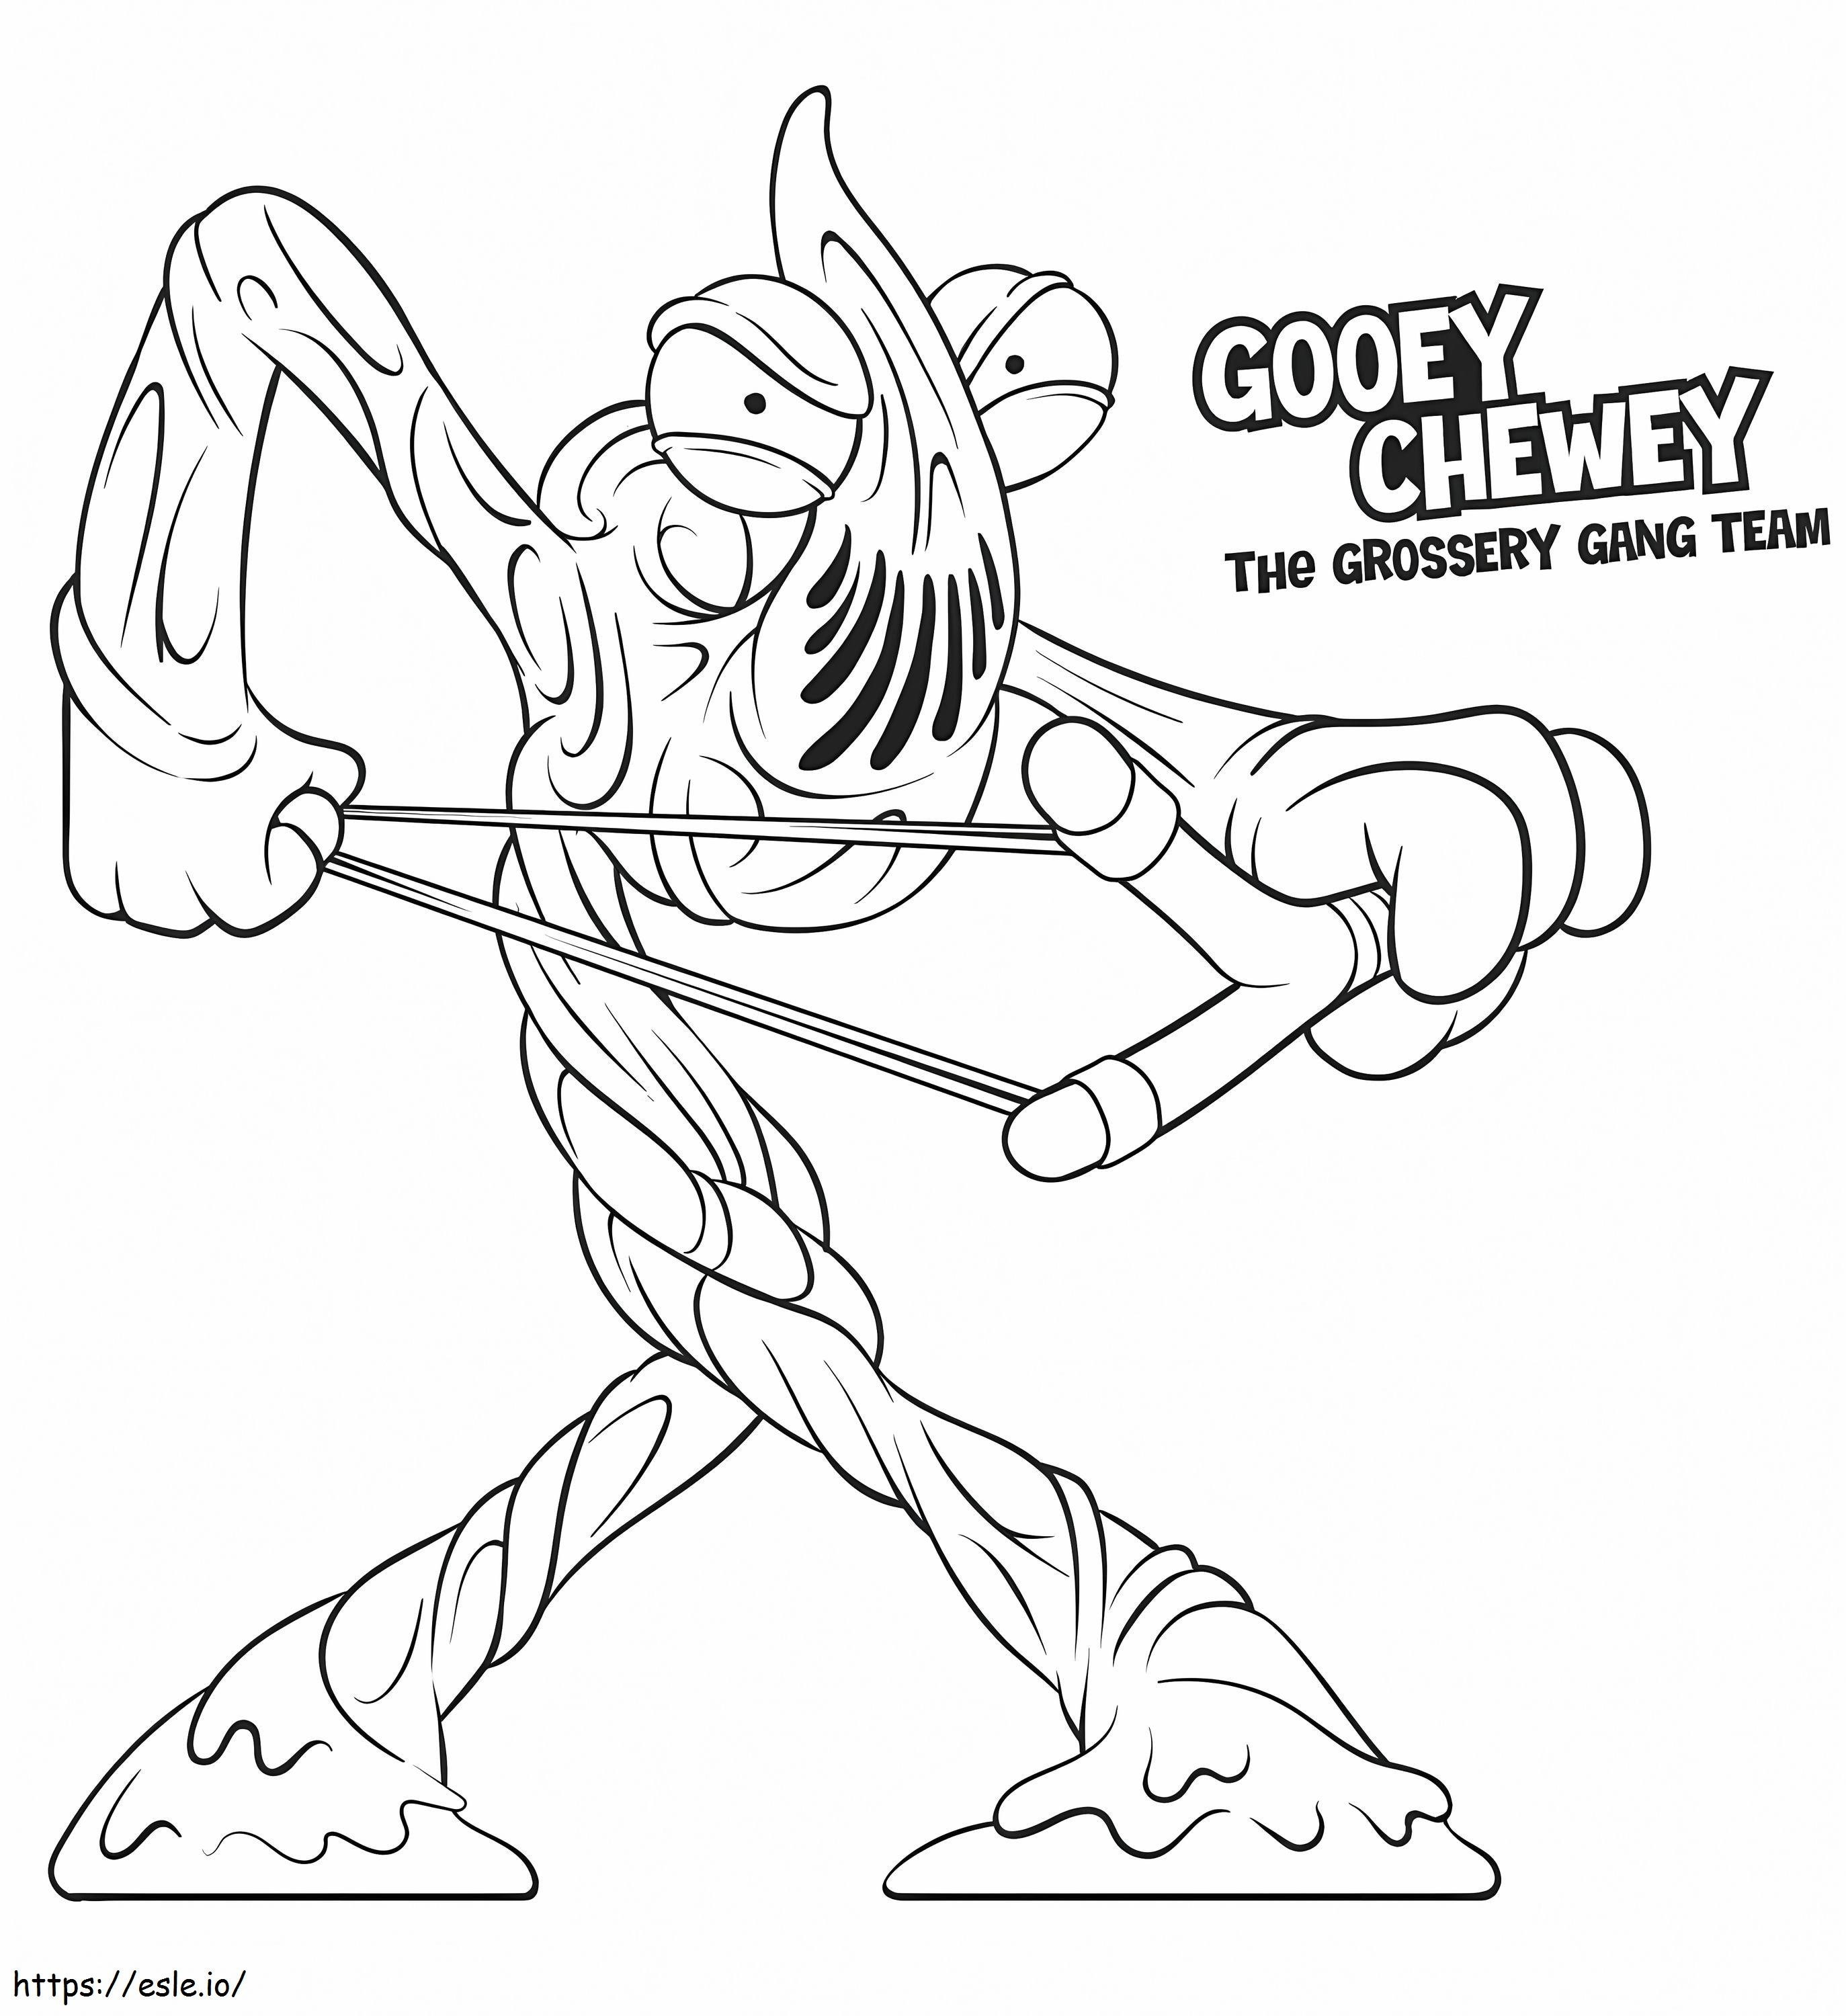 Gooey Chewey Grossery Gang coloring page